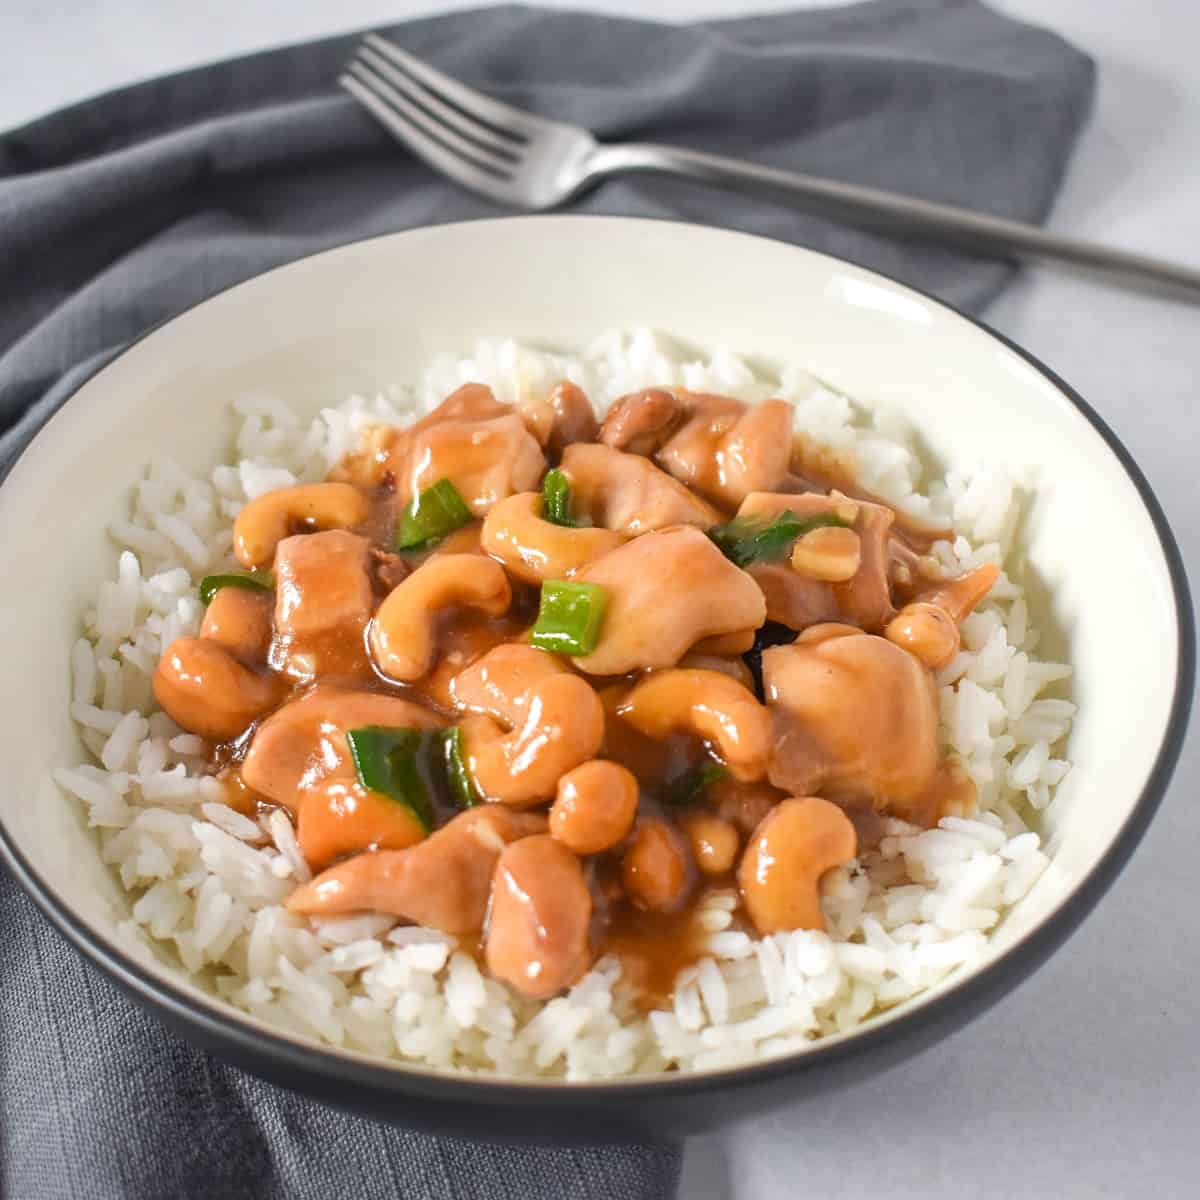 The chicken cashew served on white rice in a white bowl with a black rim. The bowl is set on a white table with a gray linen and a fork.